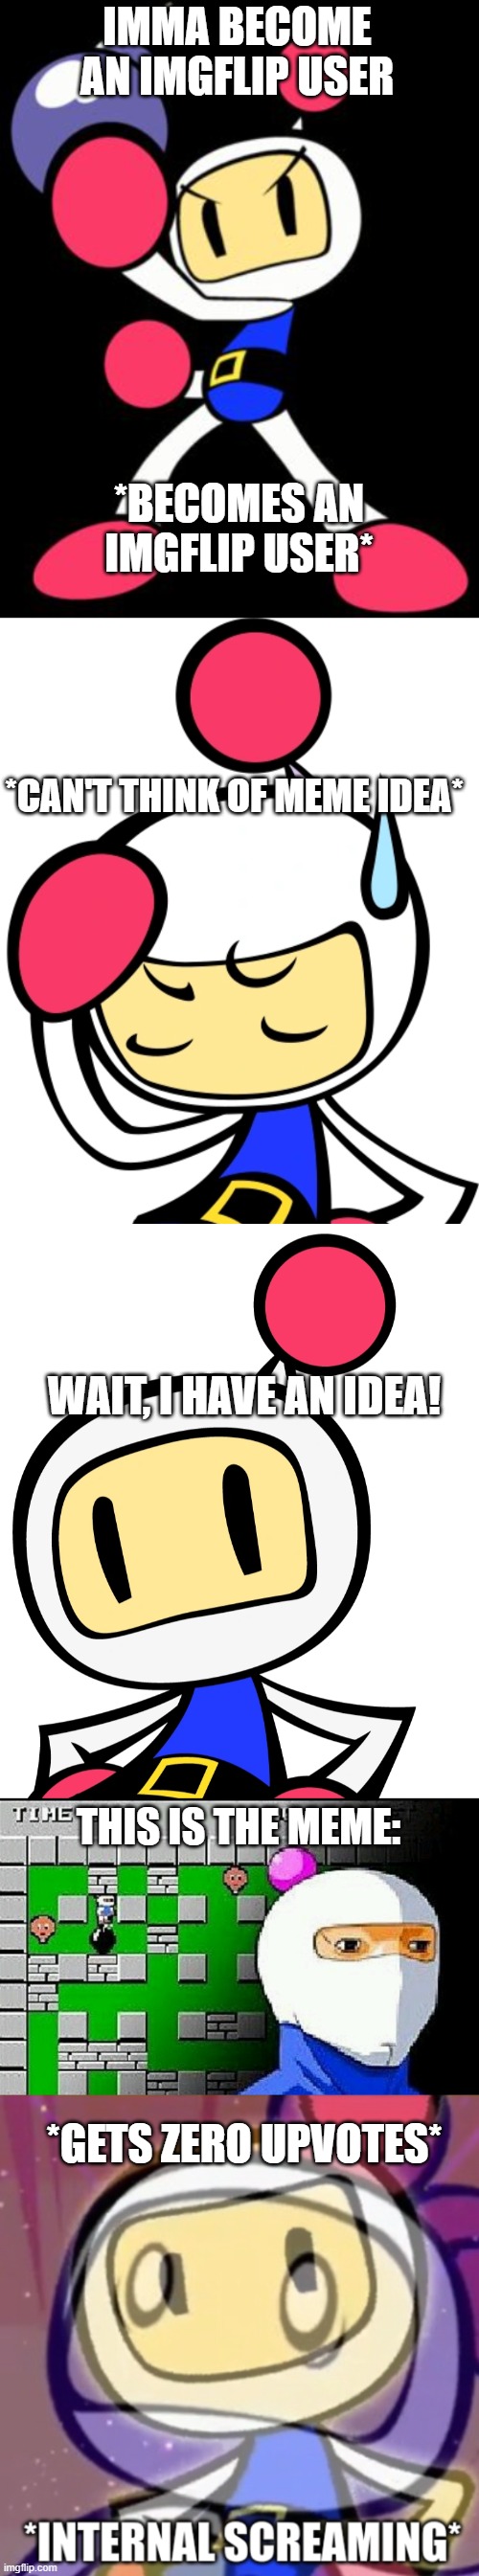 White bomber-sama tries Imgflip | IMMA BECOME AN IMGFLIP USER; *BECOMES AN IMGFLIP USER*; *CAN'T THINK OF MEME IDEA*; WAIT, I HAVE AN IDEA! THIS IS THE MEME:; *GETS ZERO UPVOTES* | image tagged in bomberman,white bomber disappointed/annoyed,white bomber 3 super bomberman r,bomberman meme,white bomber internal screaming | made w/ Imgflip meme maker